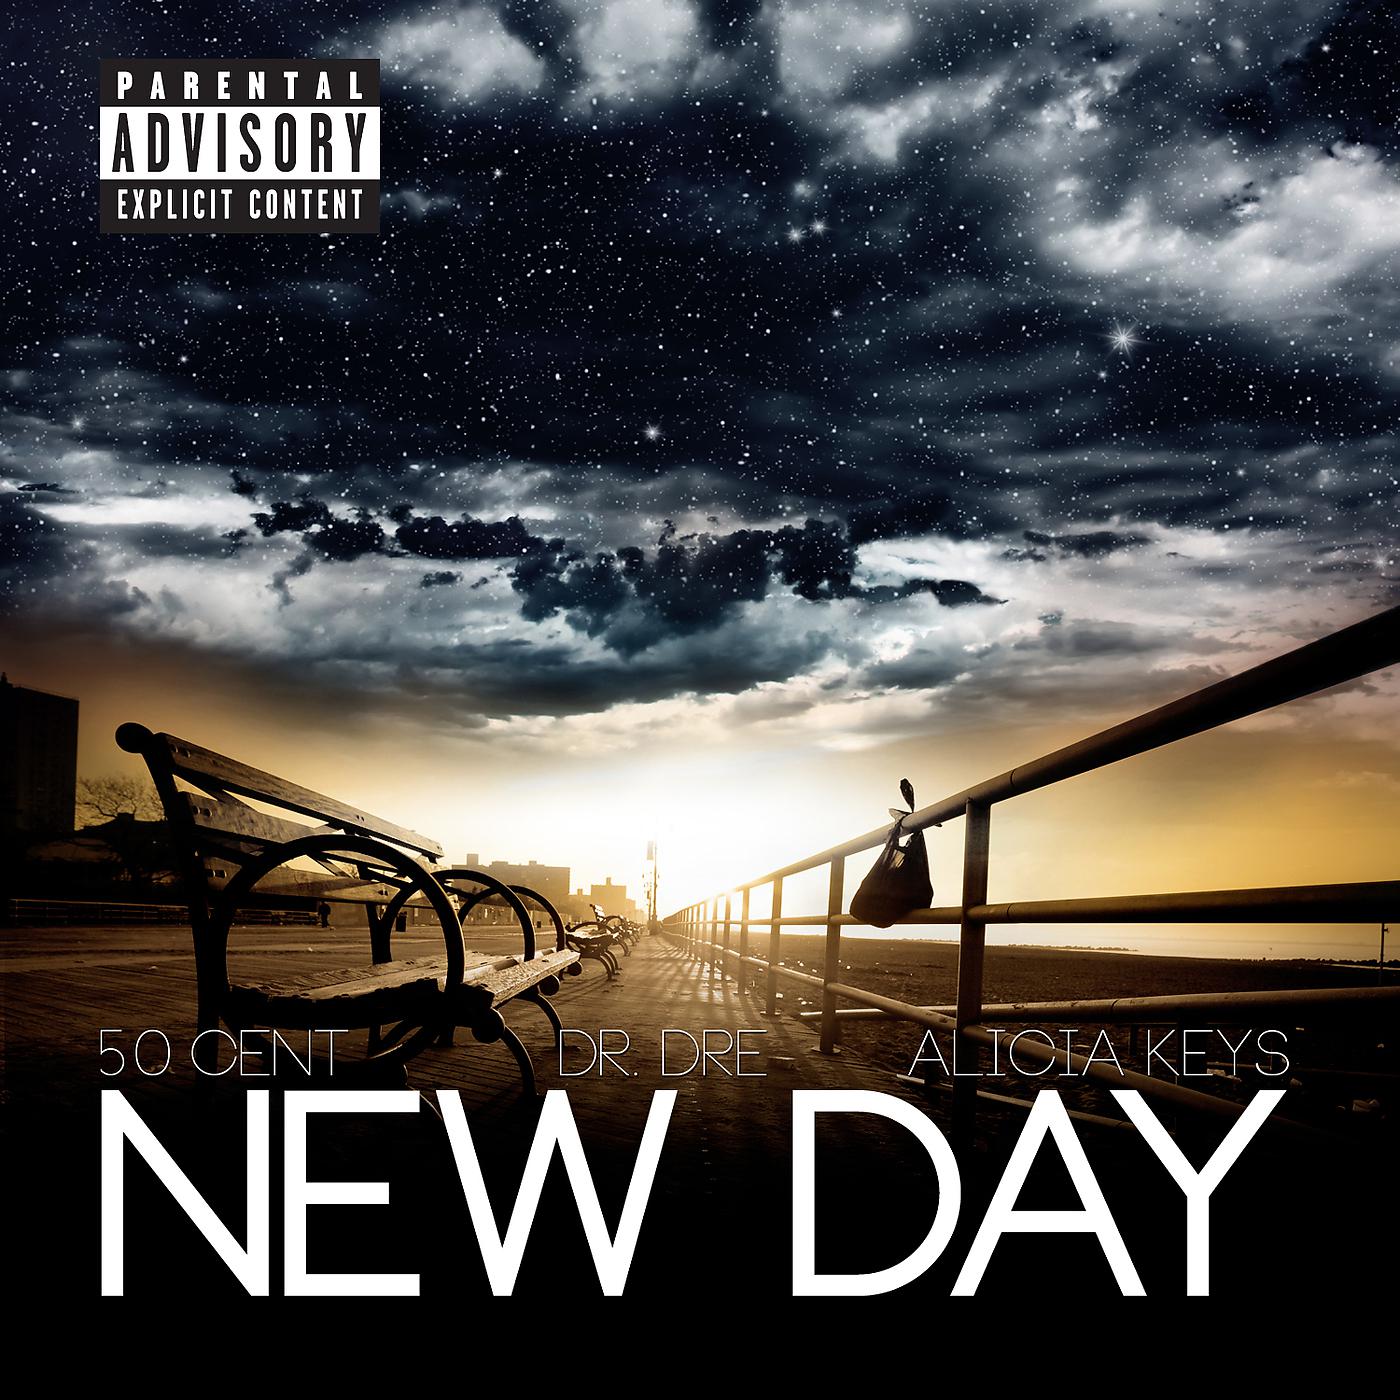 New day текст. New Day. 50 Cent Dr Dre. 50 Cent feat. Dr. Dre, Alicia Keys New Day. 50 Cent обложки альбомов.